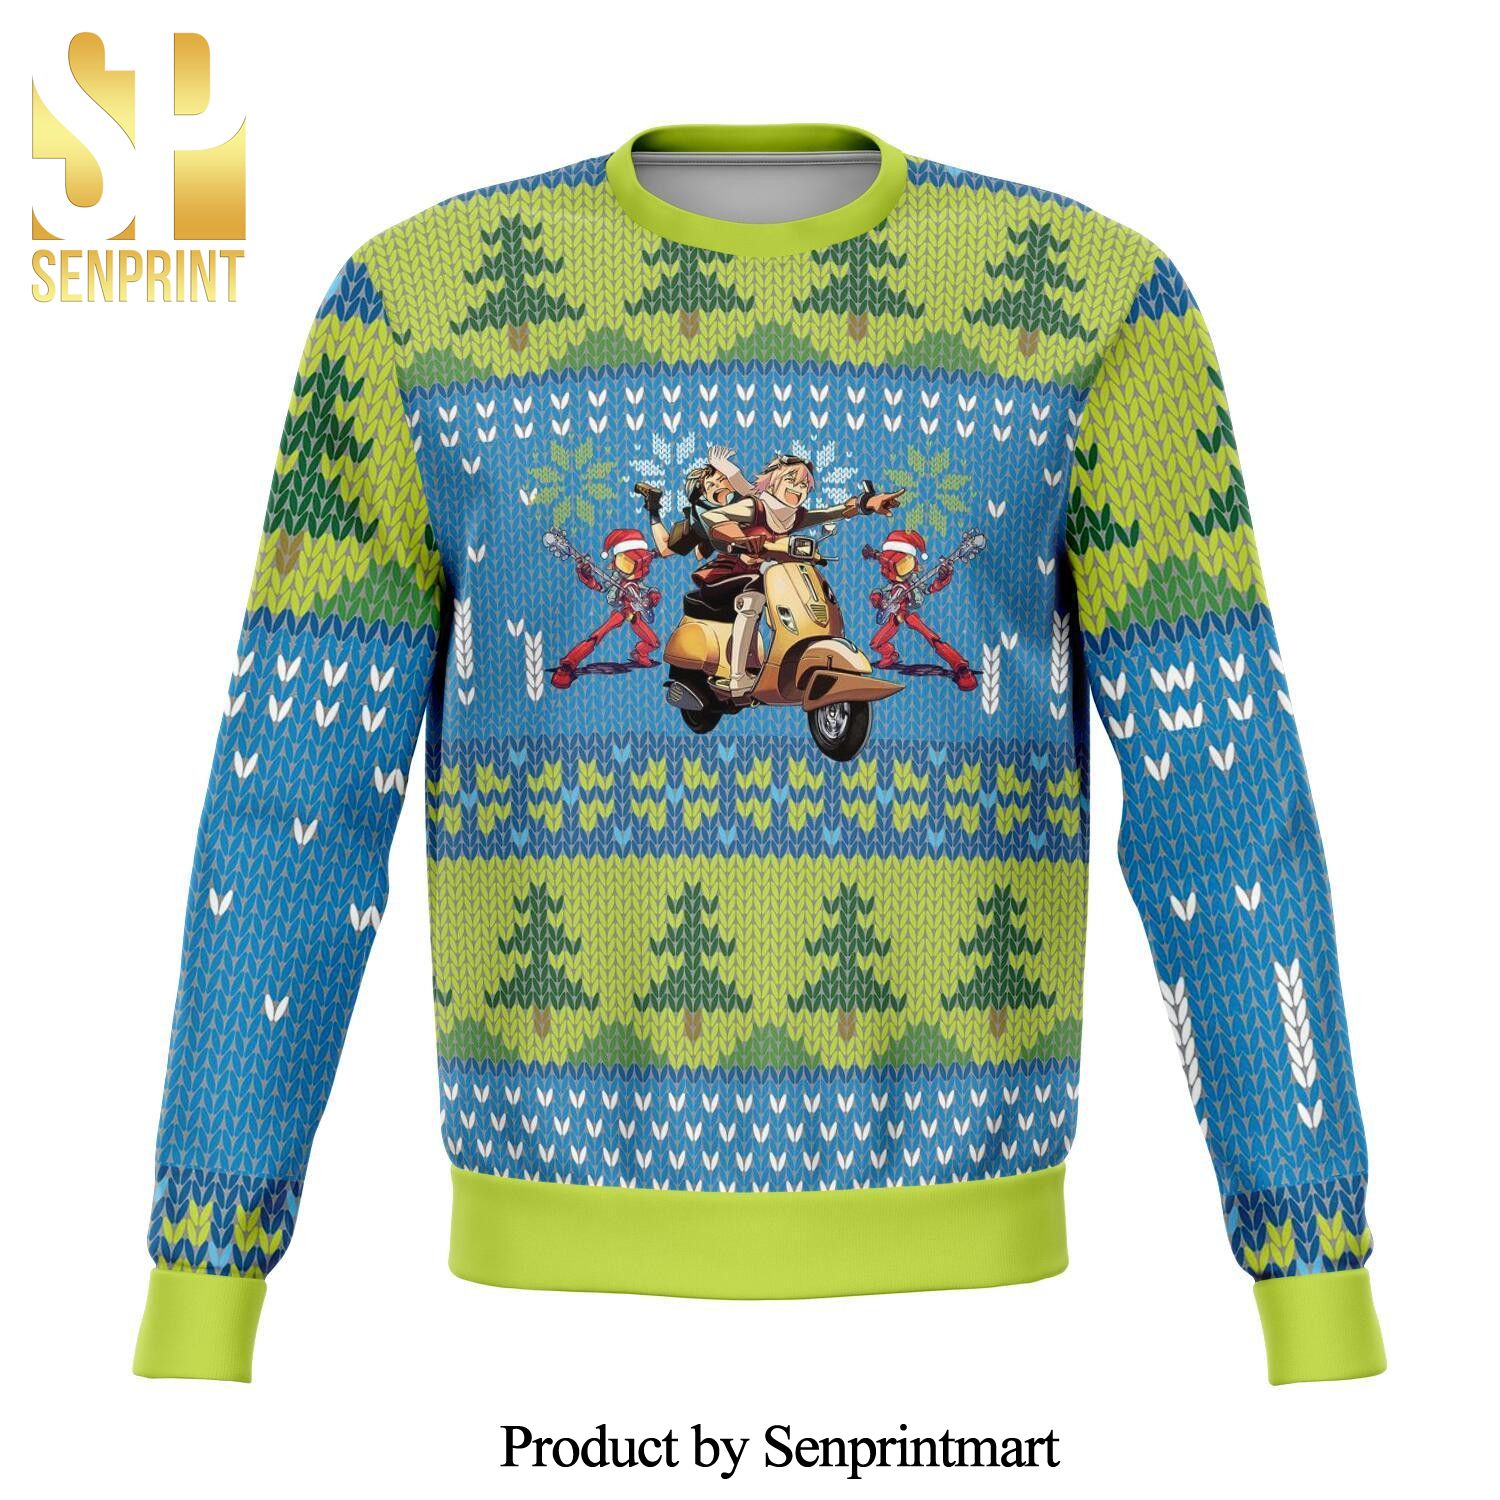 Flcl Anime Premium Knitted Ugly Christmas Sweater